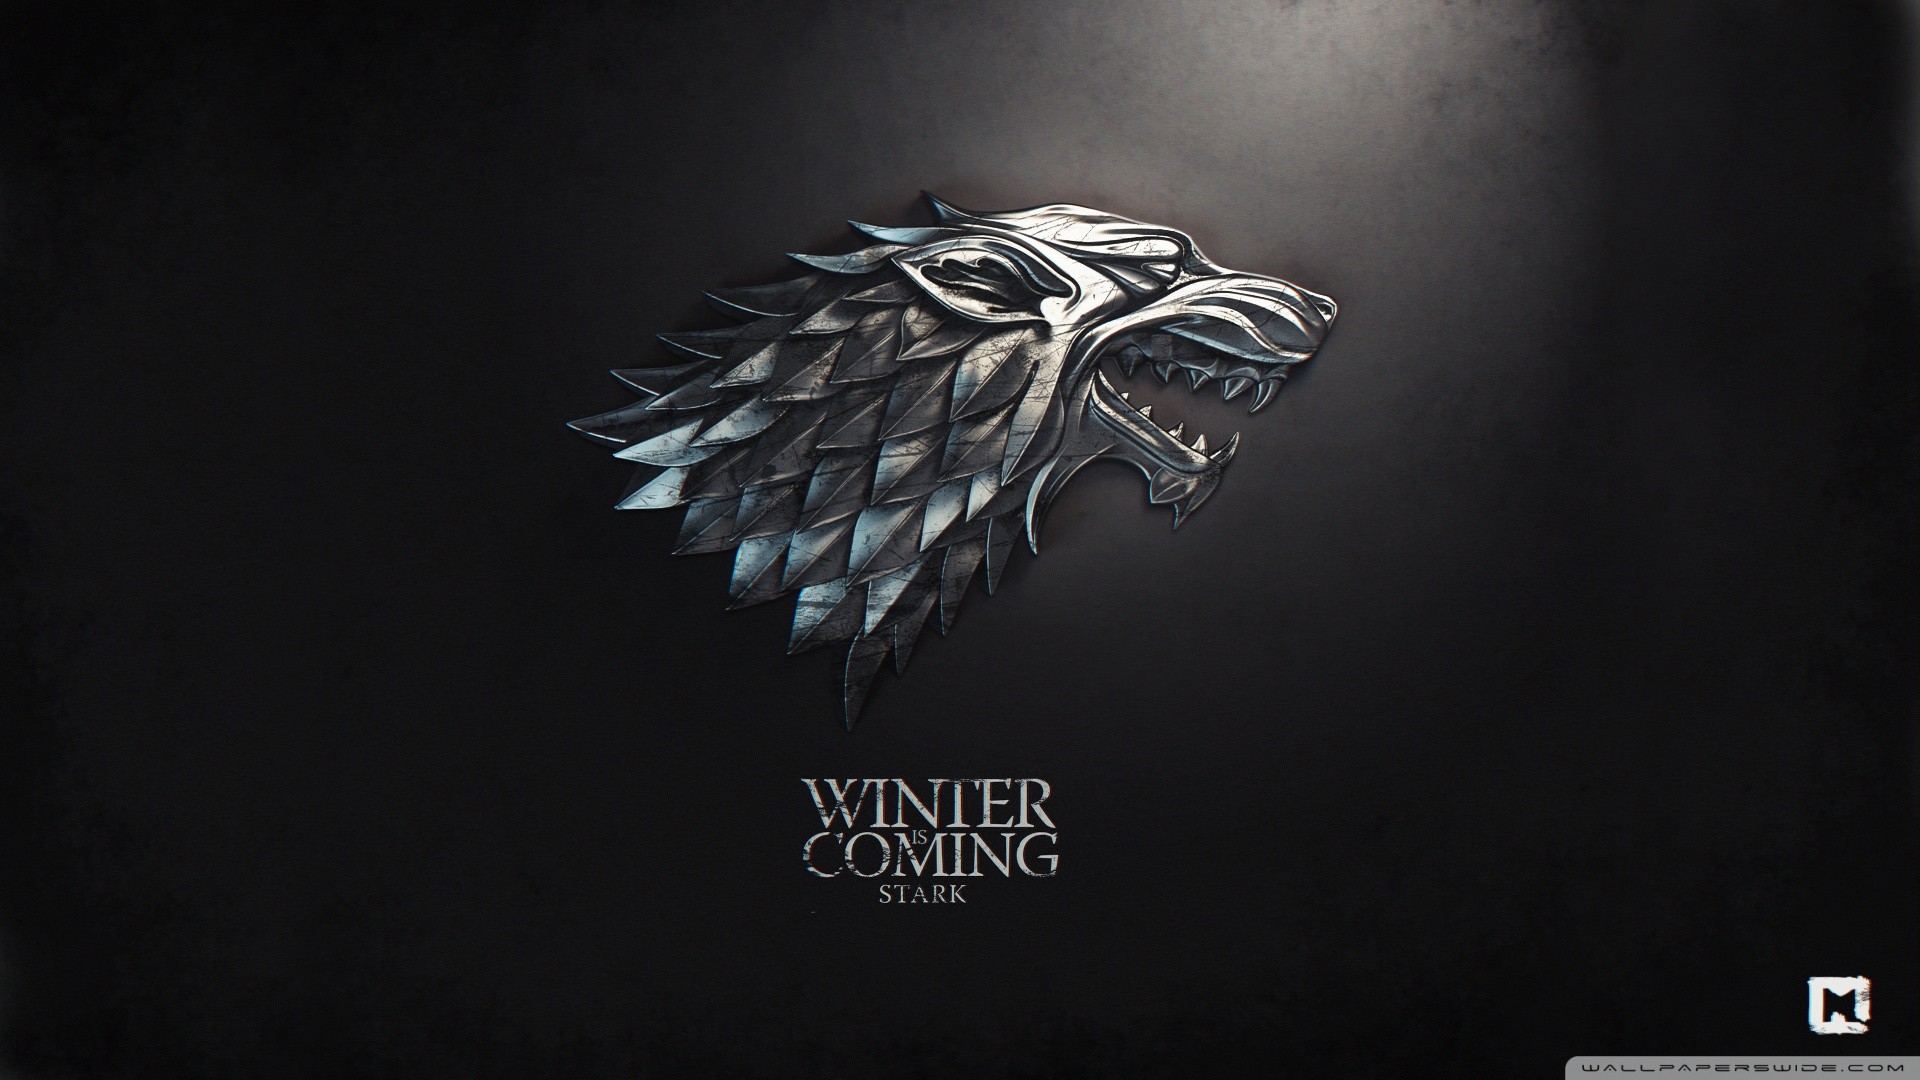 1920x1080 Game Of Thrones Winter Is Coming Stark HD Wide Wallpaper for Widescreen